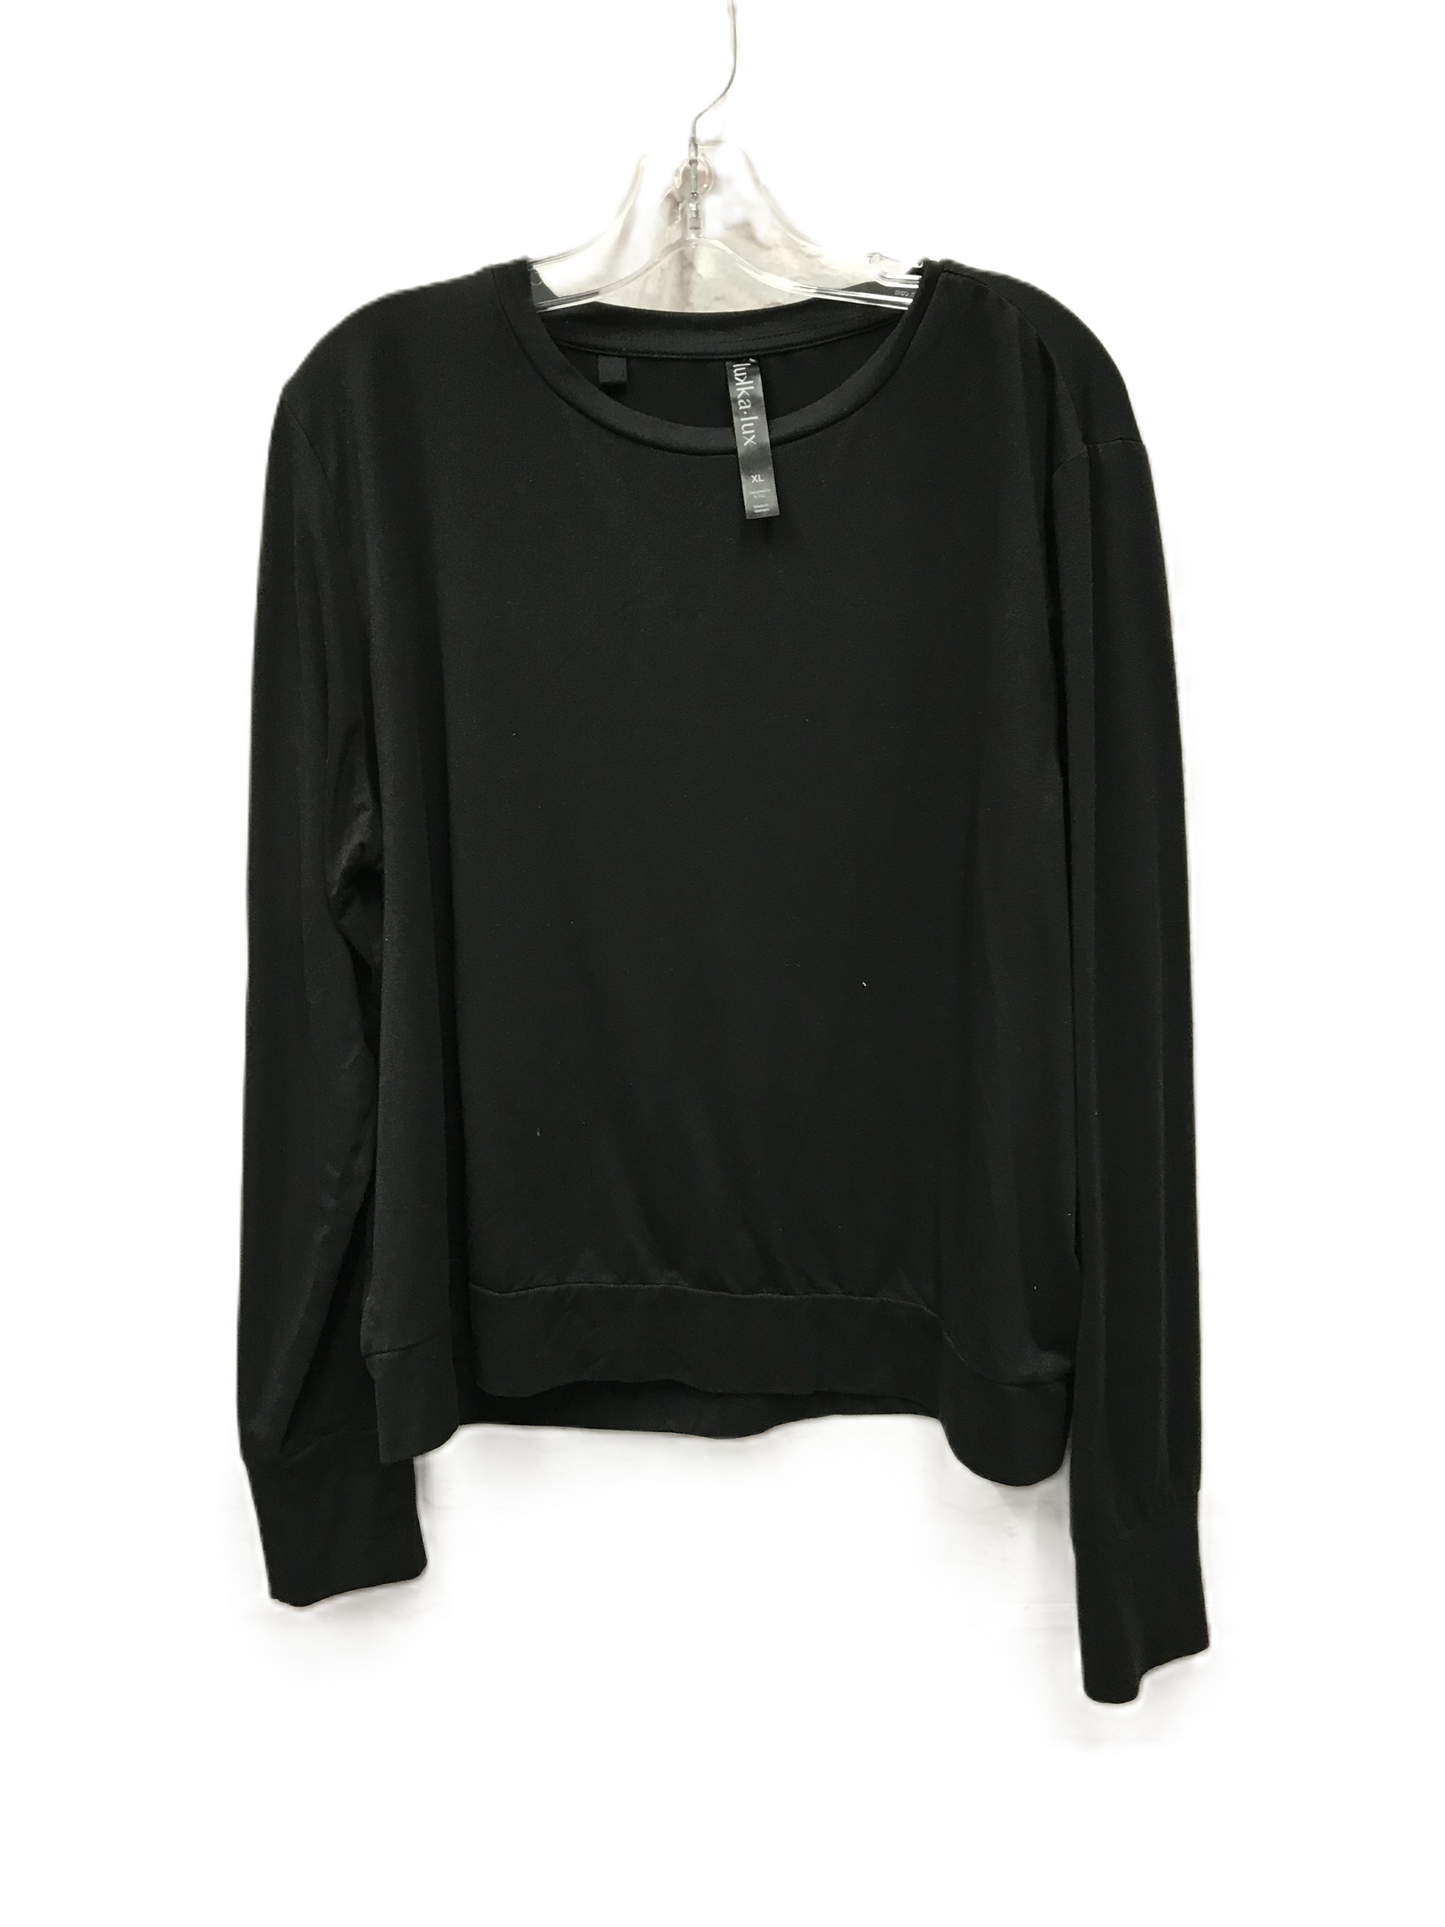 Black Athletic Top Long Sleeve Collar By Lukka, Size: Xl